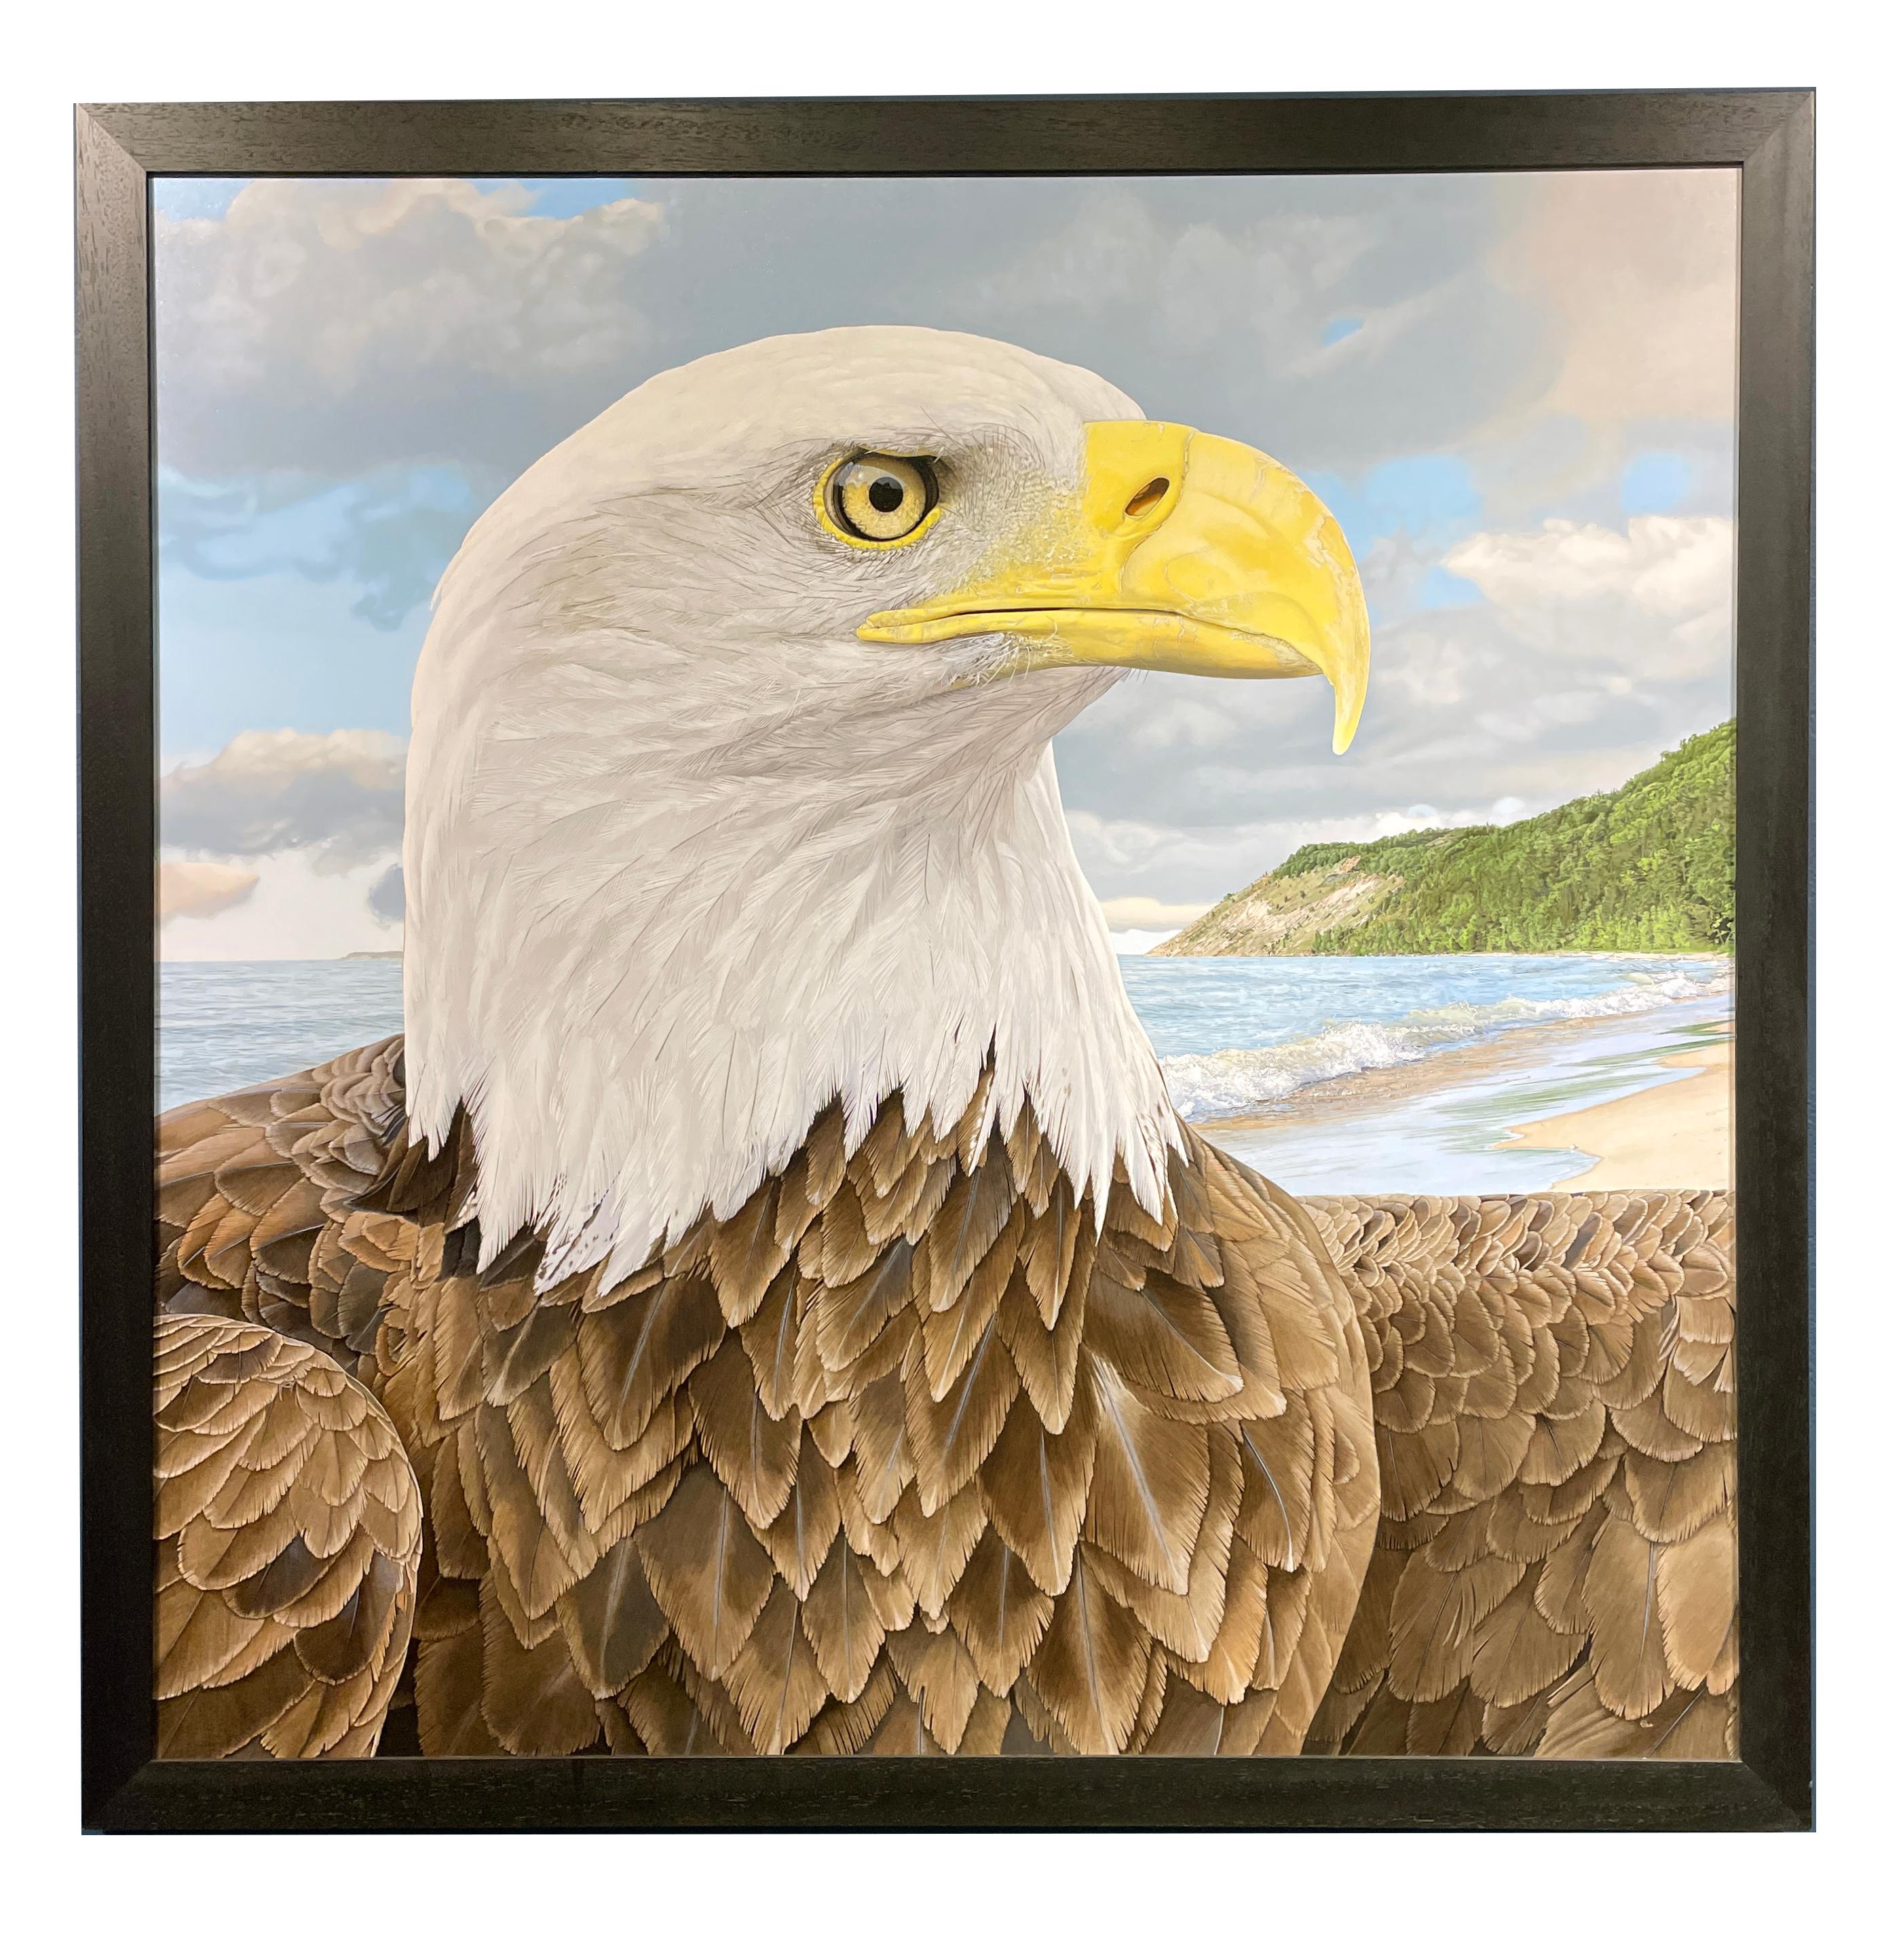 Traditional portrait painting takes a twist when the subject is a majestic bald eagle.  Artist Rick Pas delivers an extraordinarily realistic detailed portrait that almost feels tangible, tactile, as though the viewer can run their fingers through